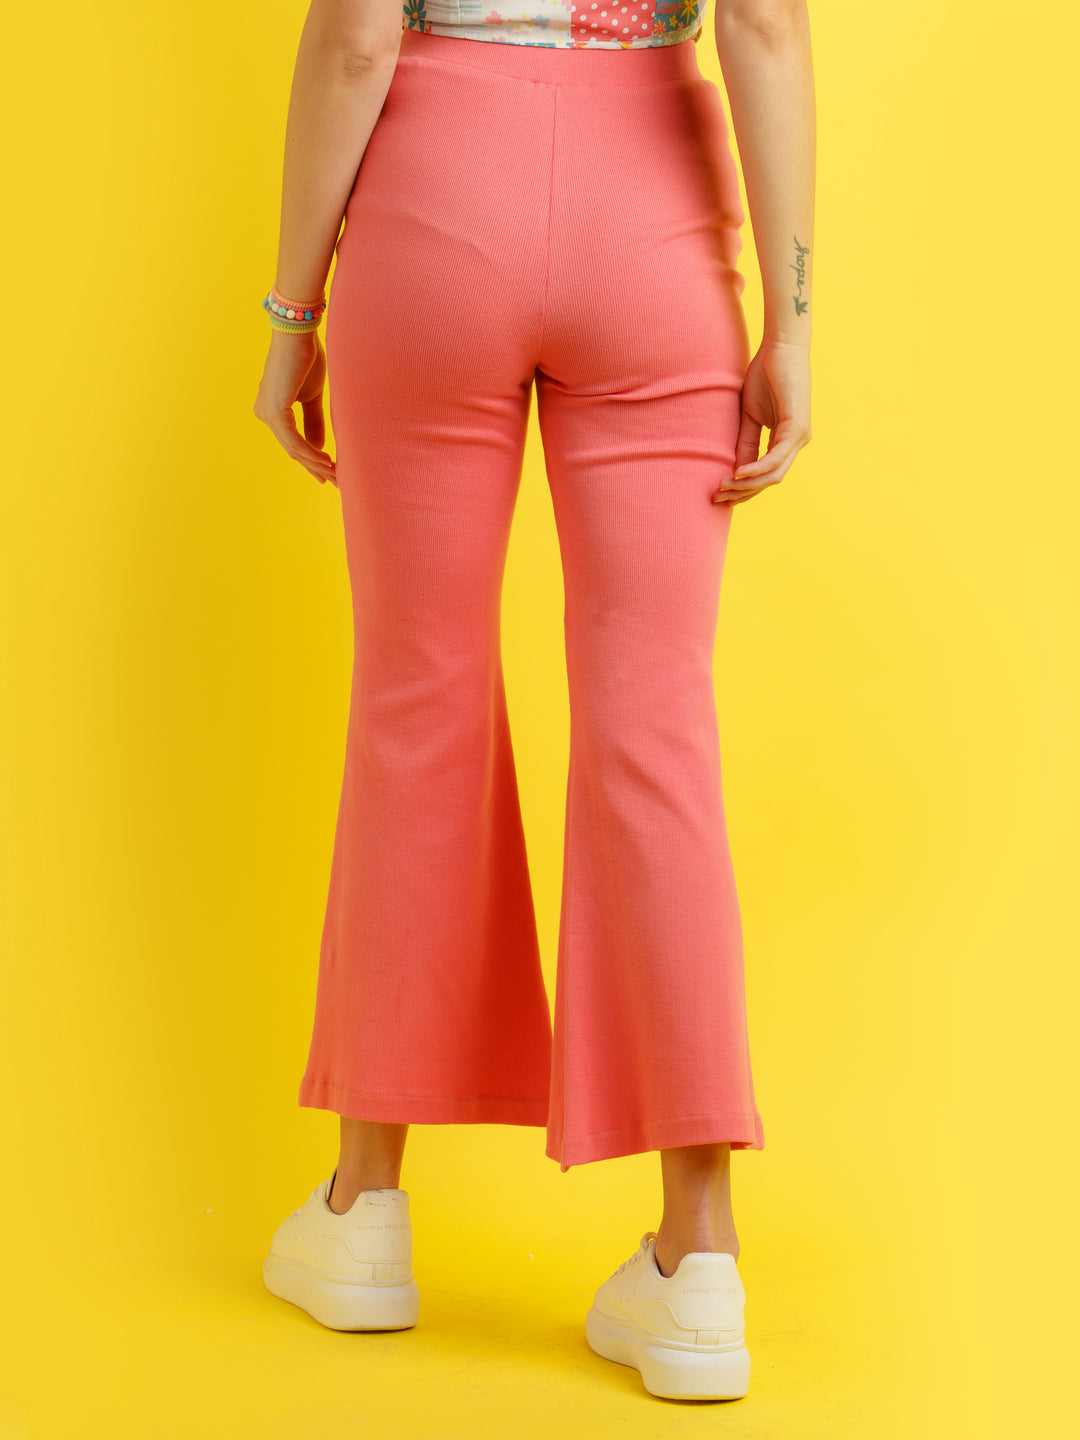 Pink Solid Pants For Women